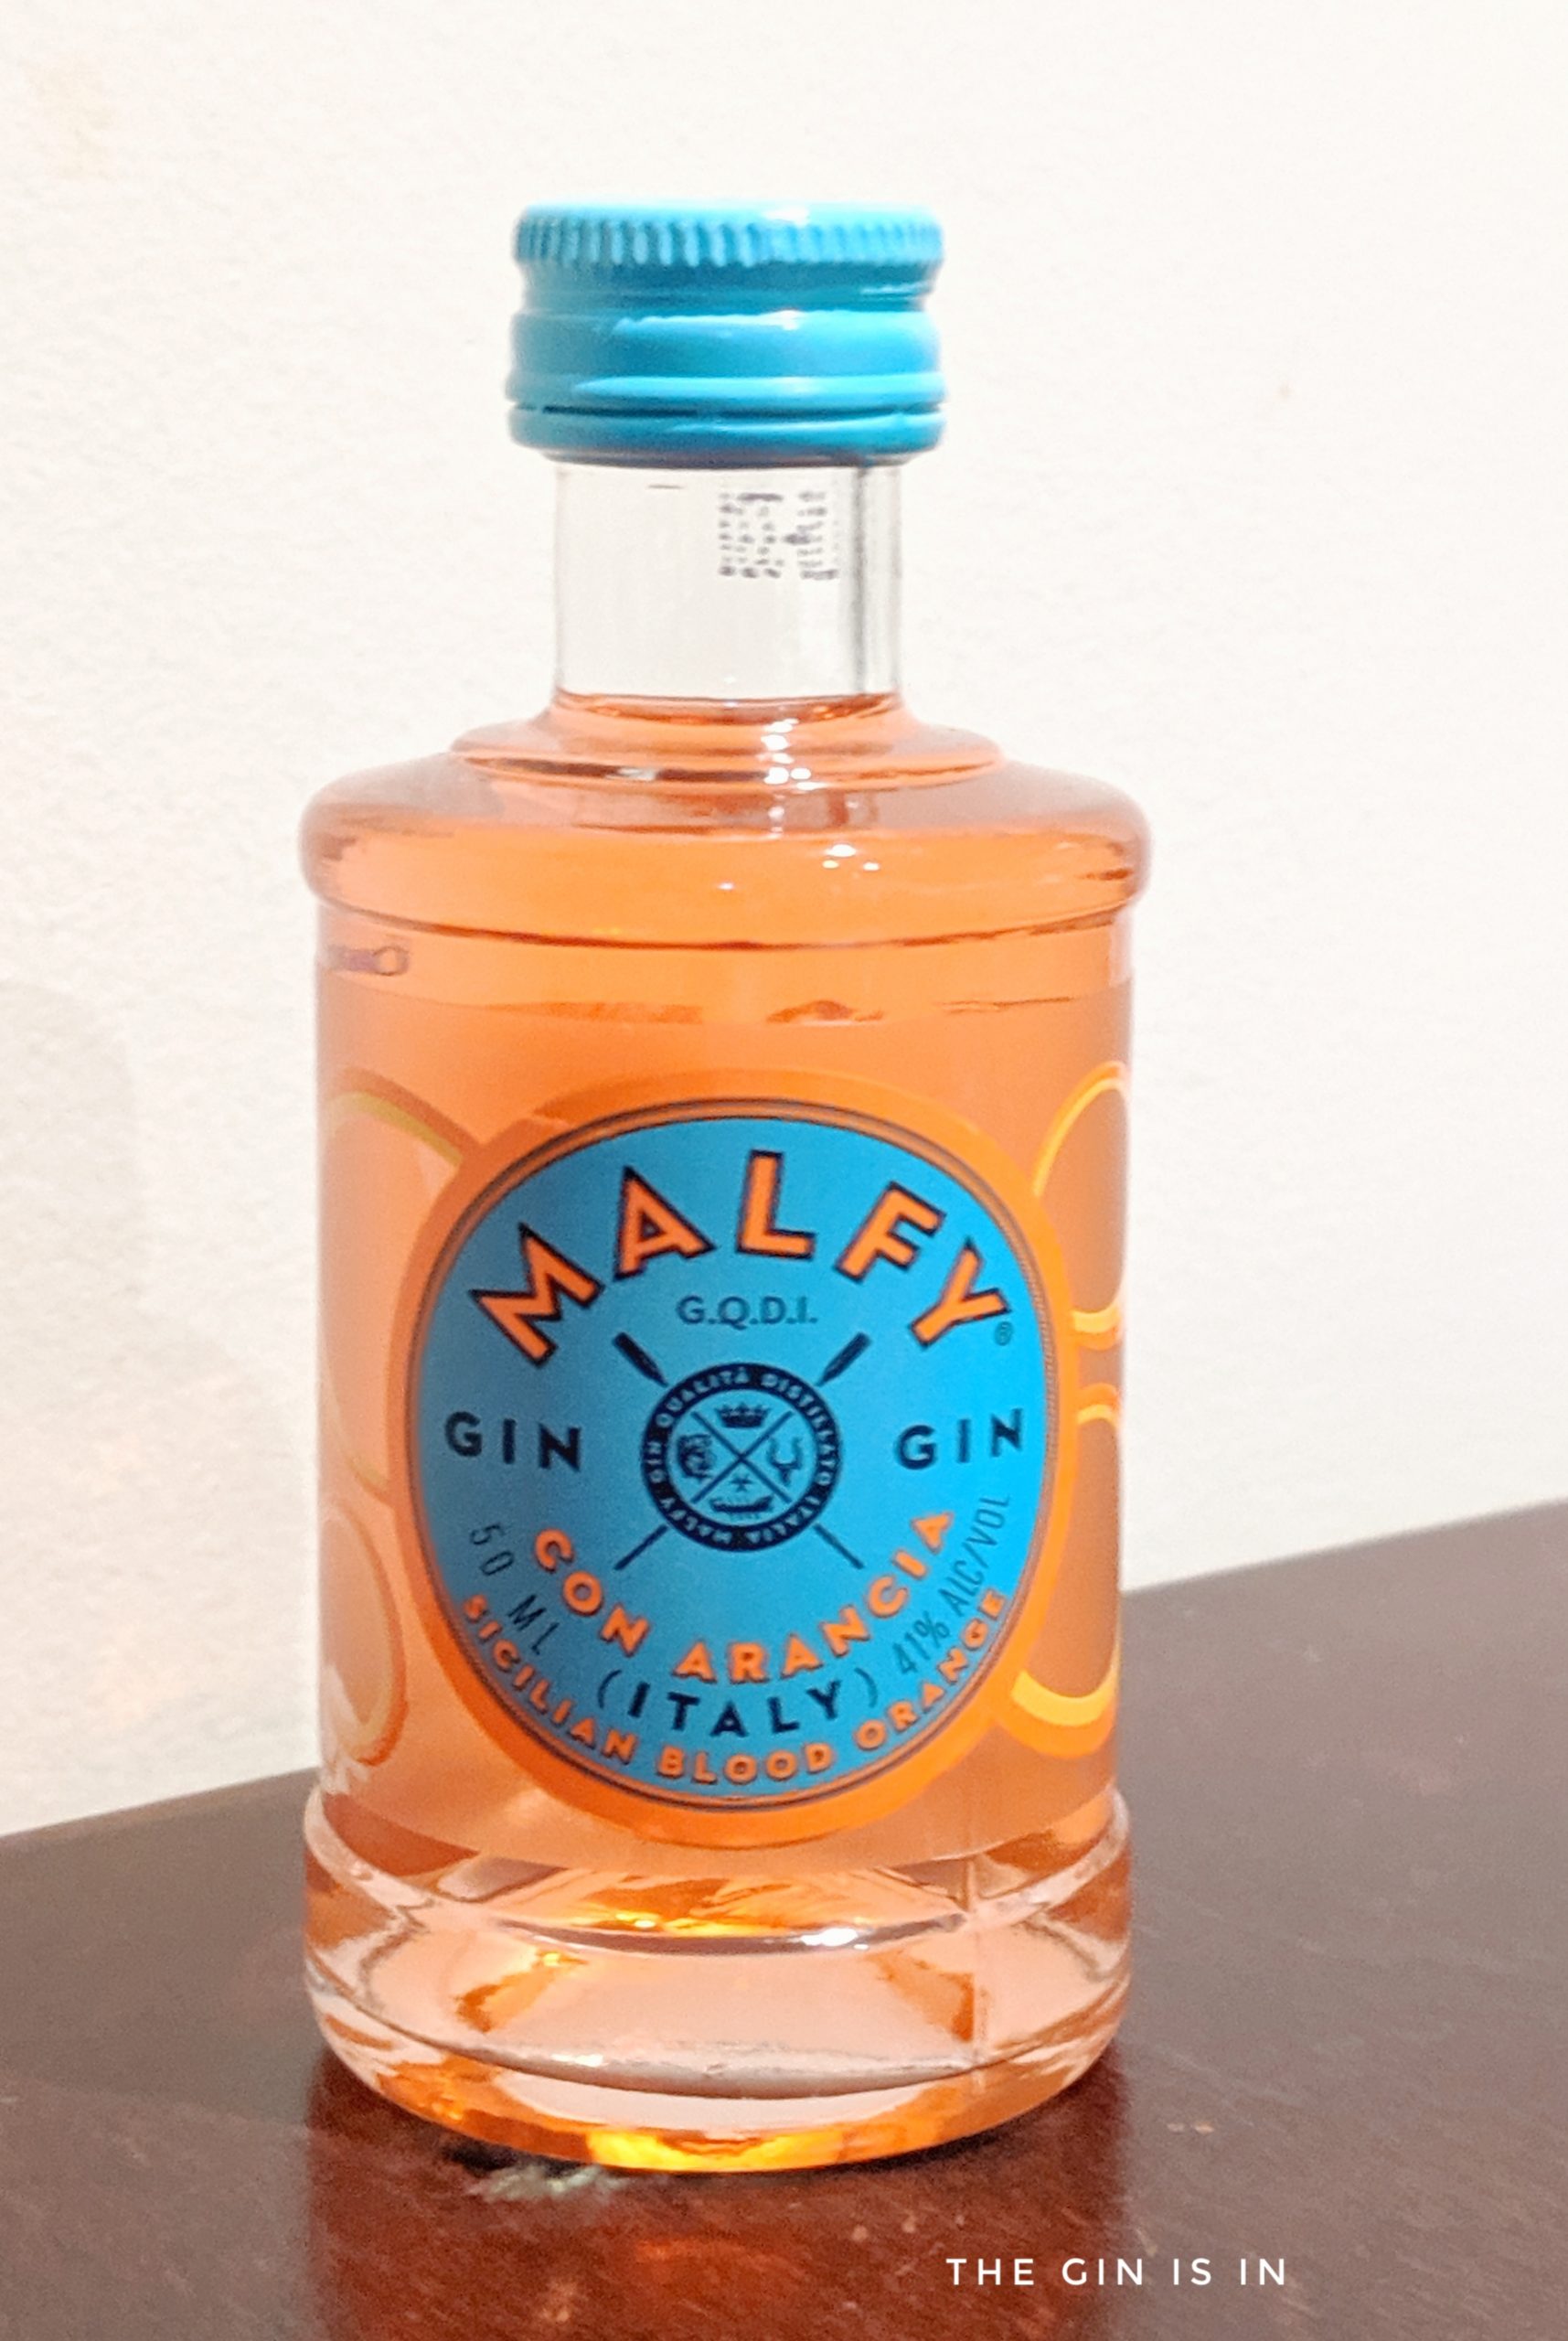 Malfy Gin Con Arancia  Expert Gin Review and Tasting Notes